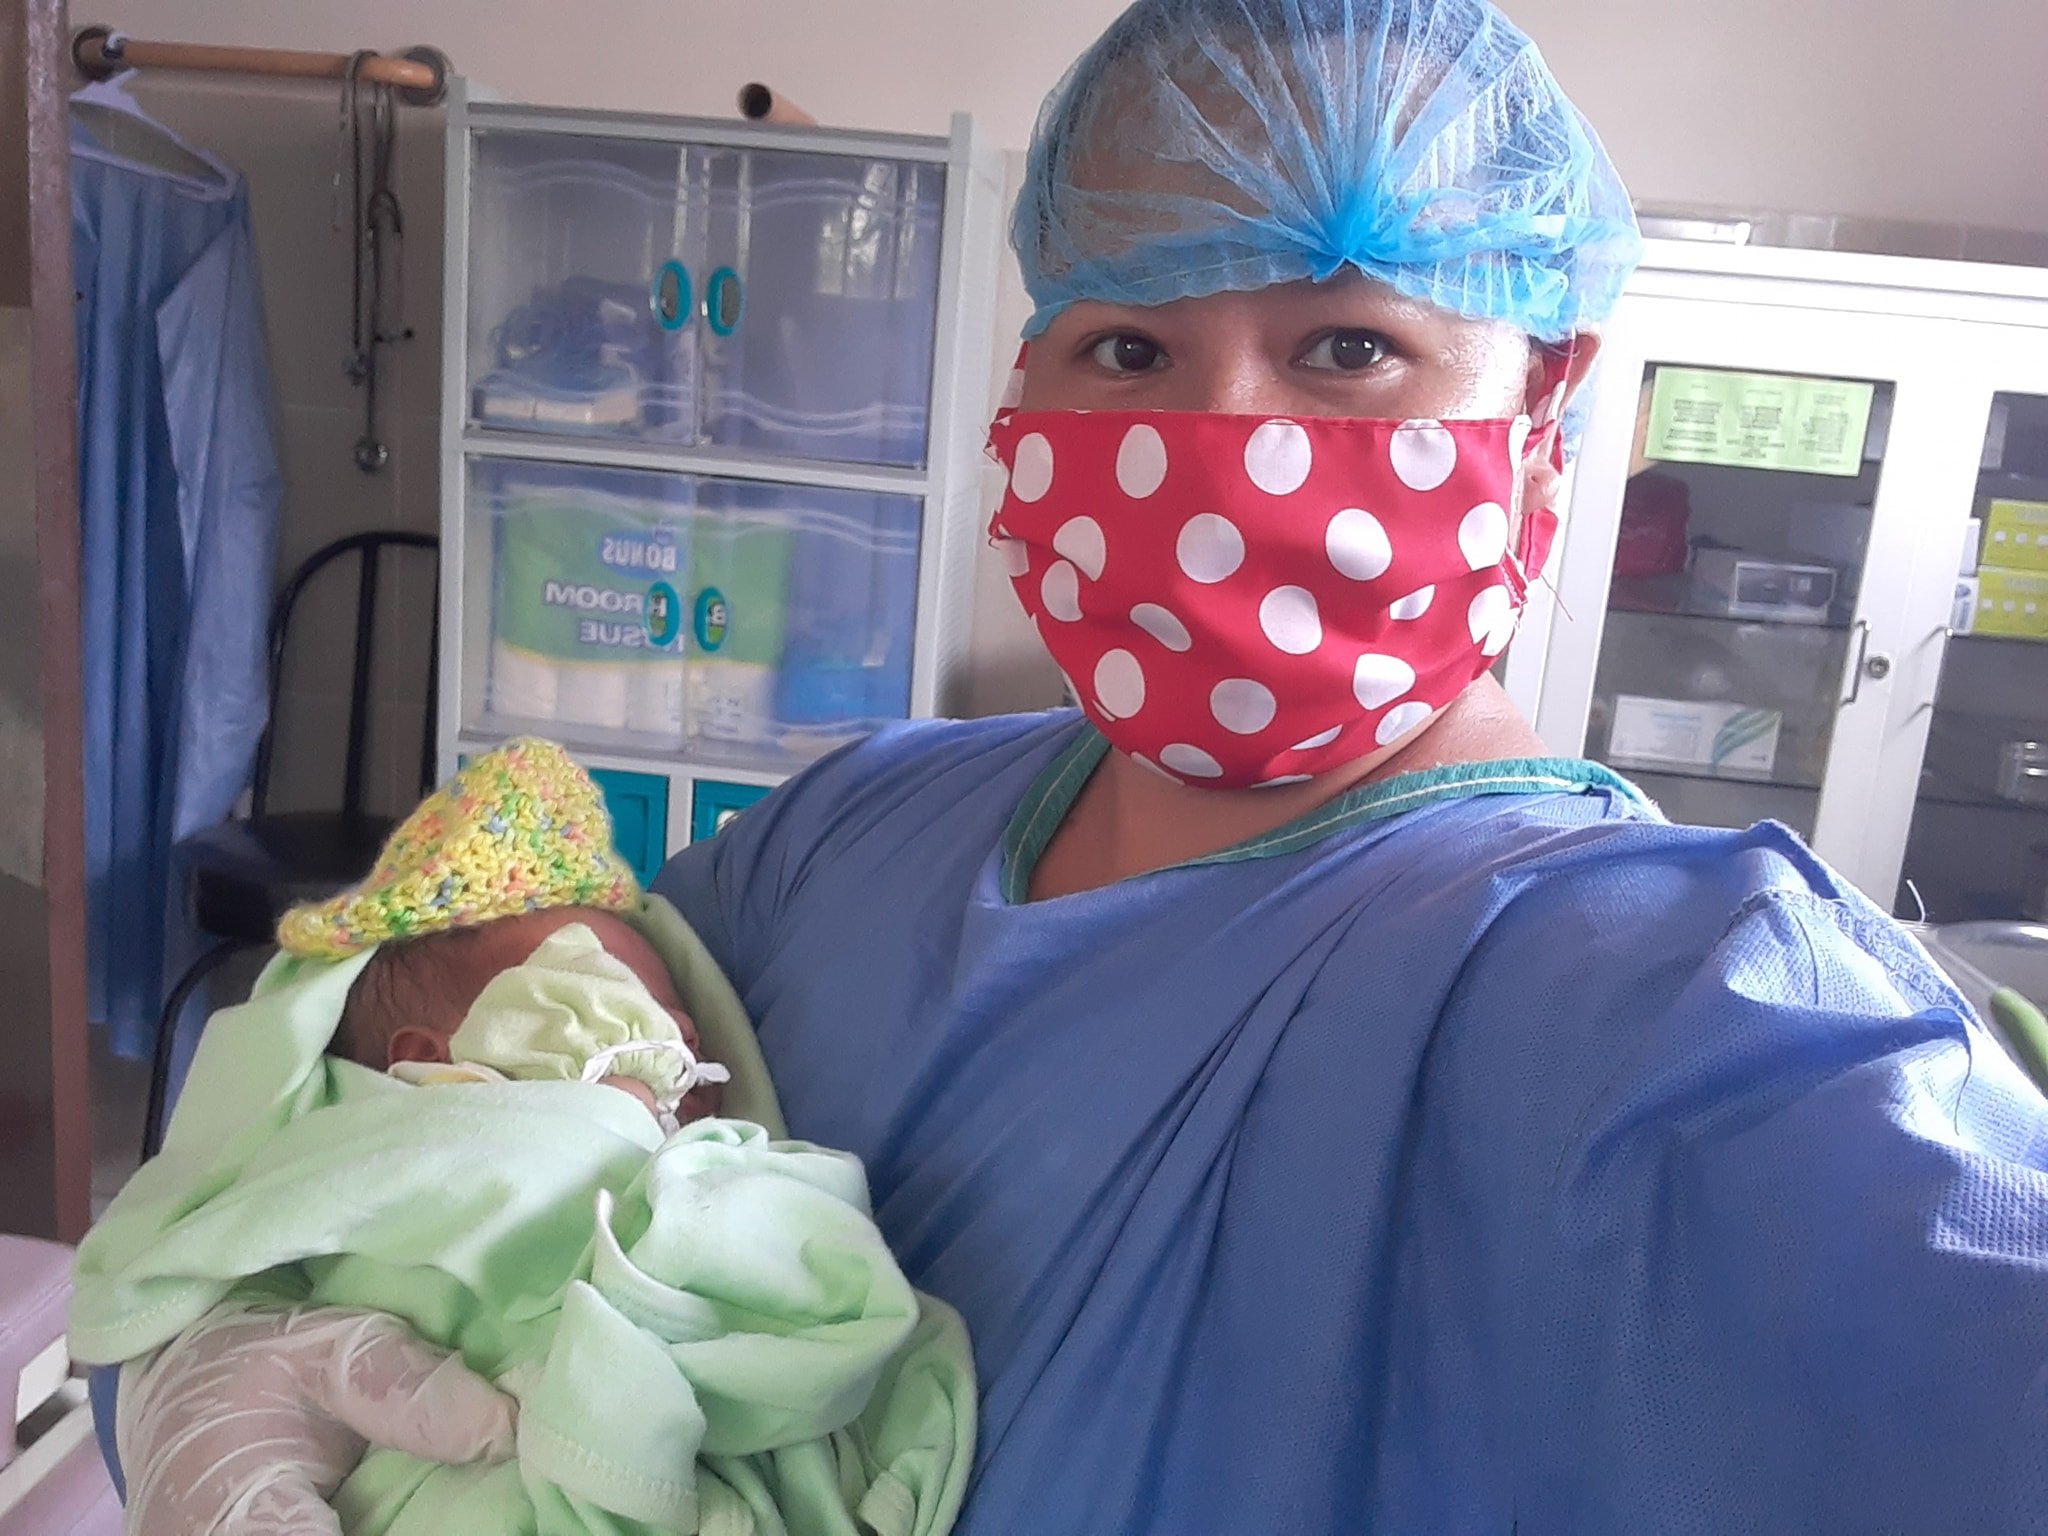 Safe in her arms. The baby born  at 2:30 AM at home is transferred to their birthing clinic for monitoring and care. 